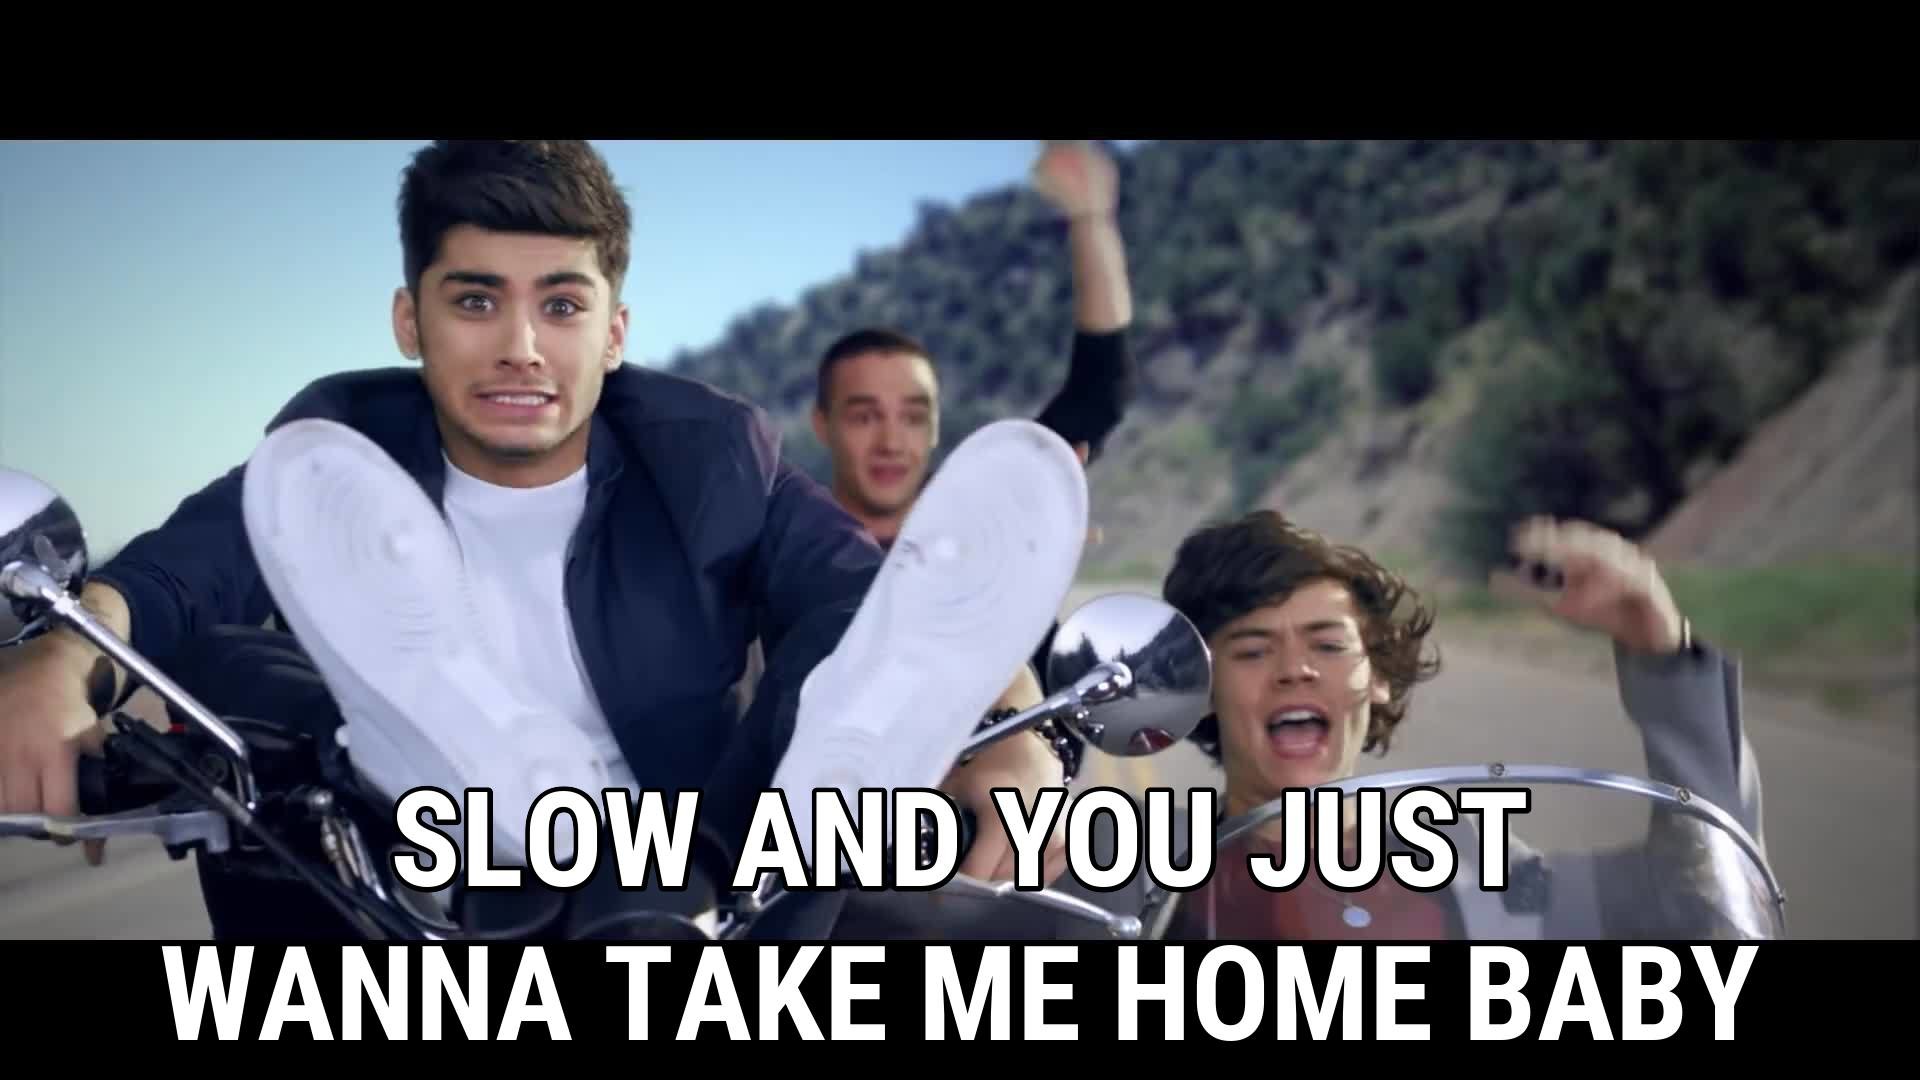 1920x1080 slow and you just wanna take me home baby